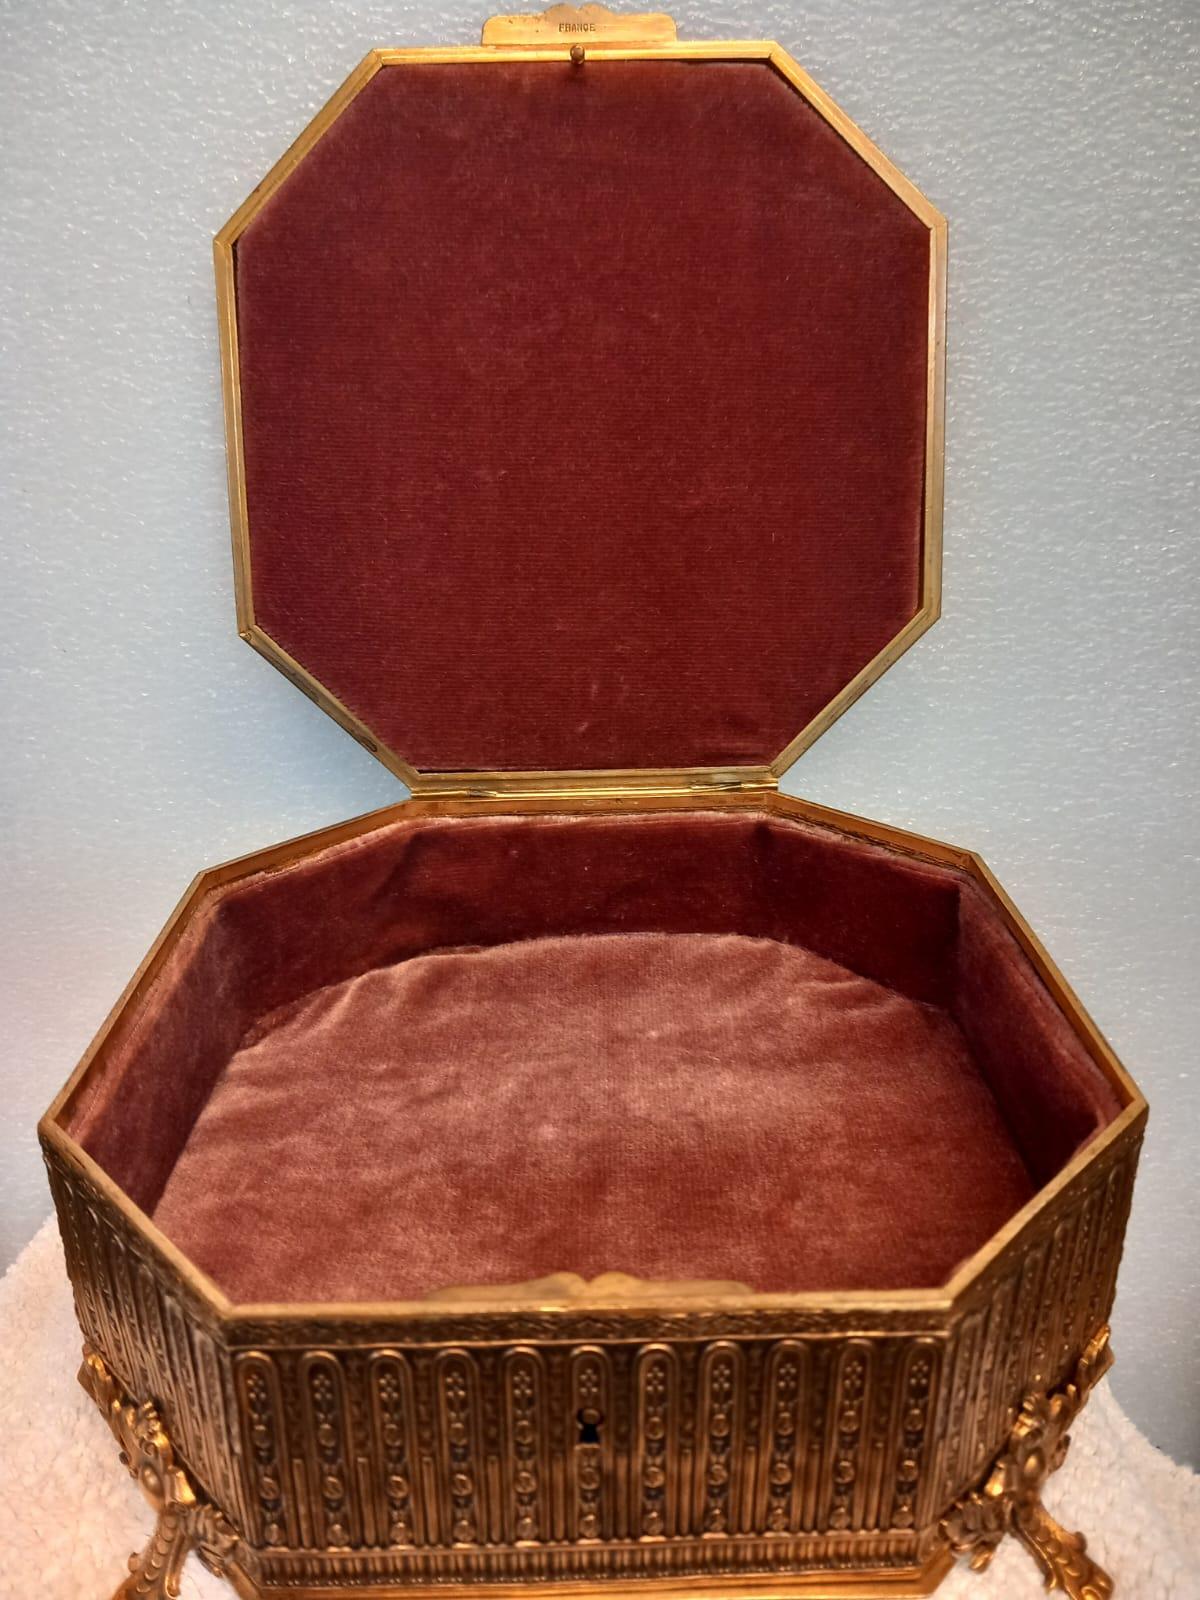 Cast Palais Royal gilt bronze and mother of pearl jewellery casket or trinket box For Sale